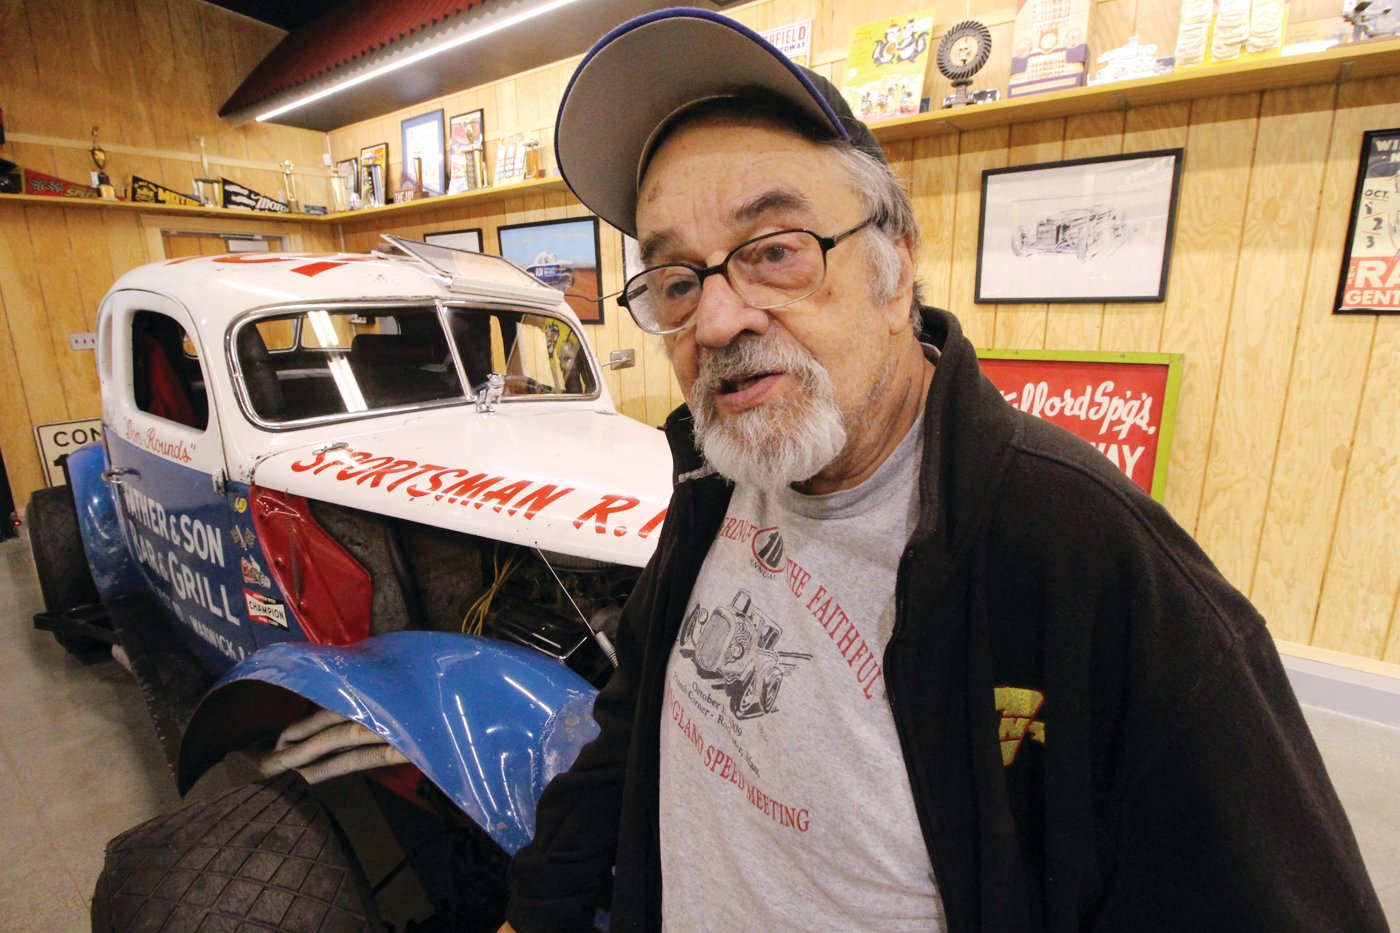 A DEVOTEE OF HISTORY: Bob Silvia, an inductee of the New England Auto Racing Hall of Fame helped find the car.